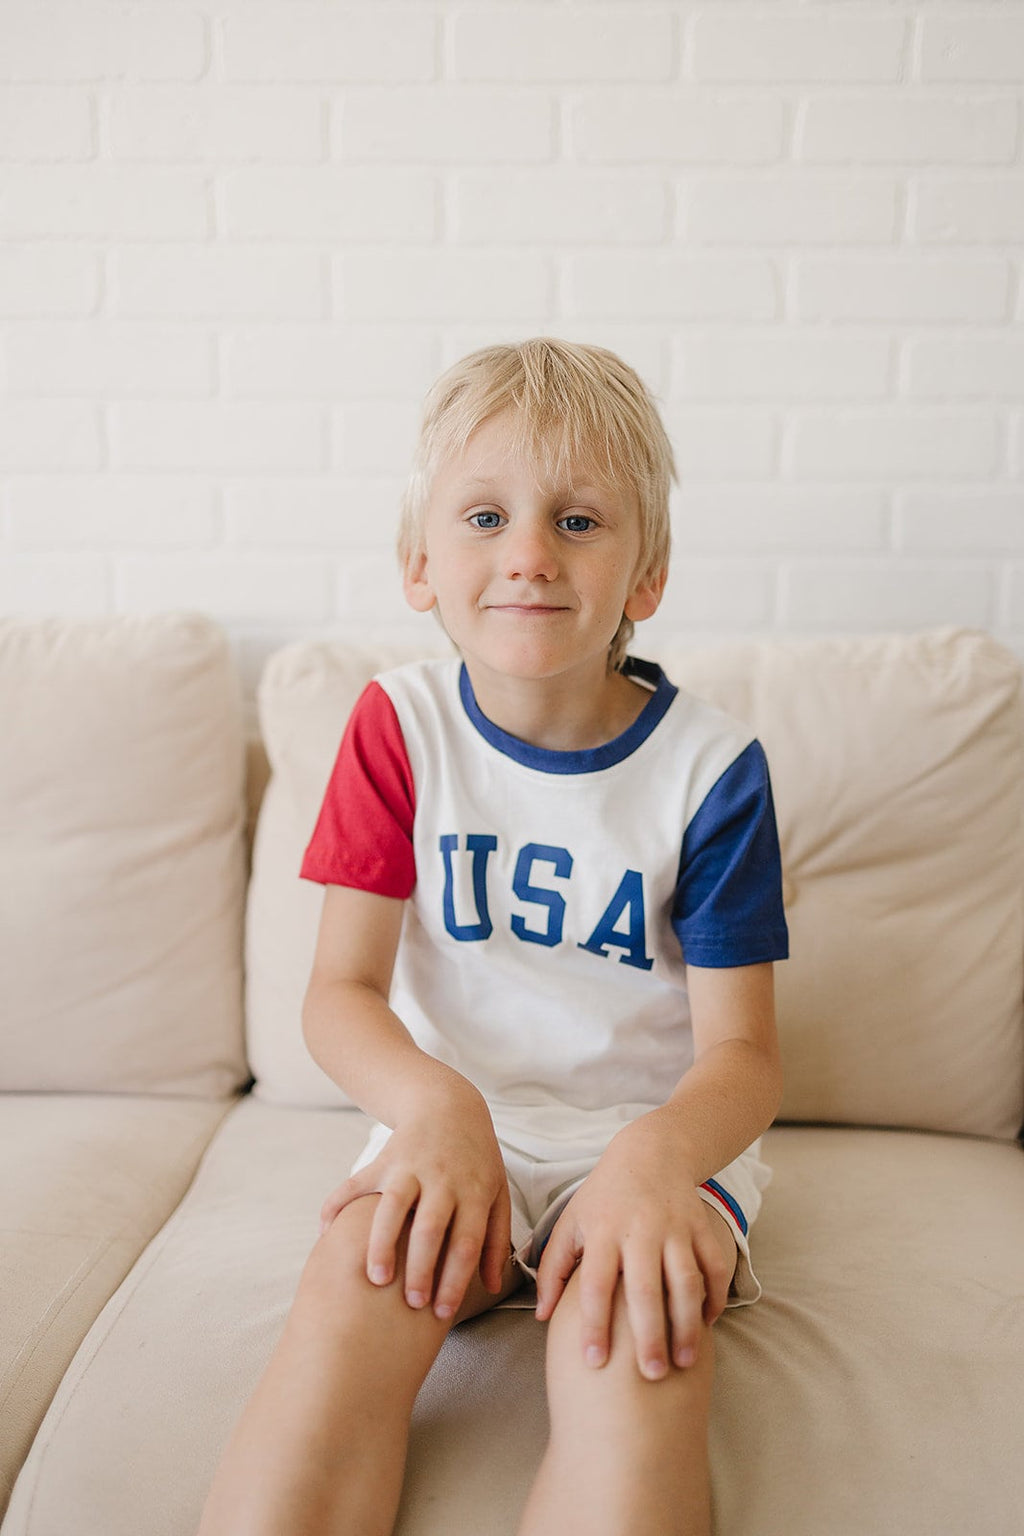 USA Colorblock T-Shirt - 4th of July Baby and Toddler Shirt - 4th of July Outfit - Red, White & Blue Patriotic Shirt - Toddler 4th of July